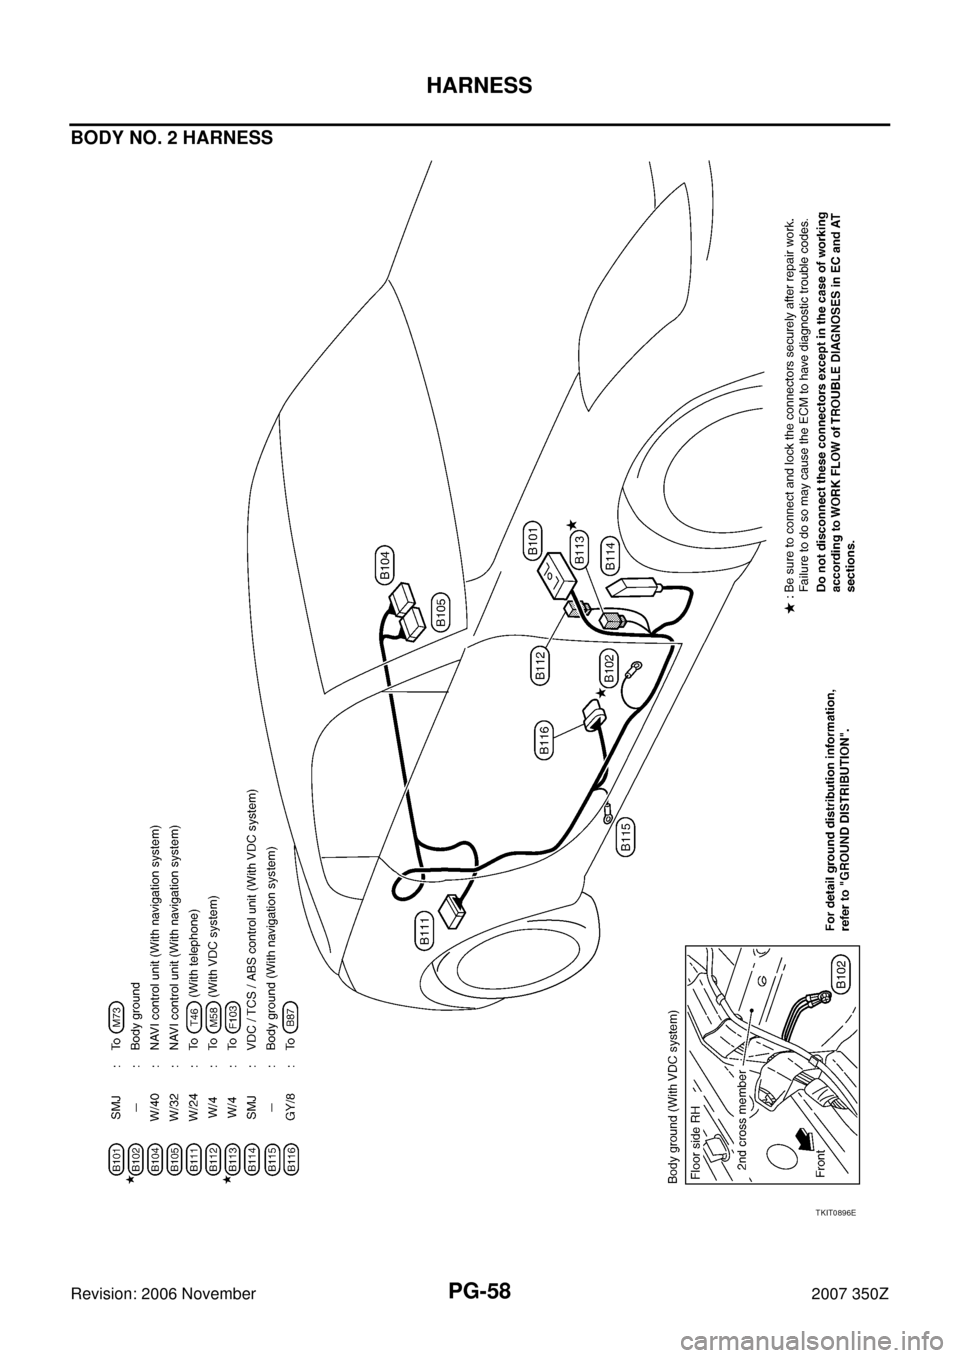 NISSAN 350Z 2007 Z33 Power Supply, Ground And Circuit Repair Manual PG-58
HARNESS
Revision: 2006 November2007 350Z
BODY NO. 2 HARNESS
TKIT0896E 